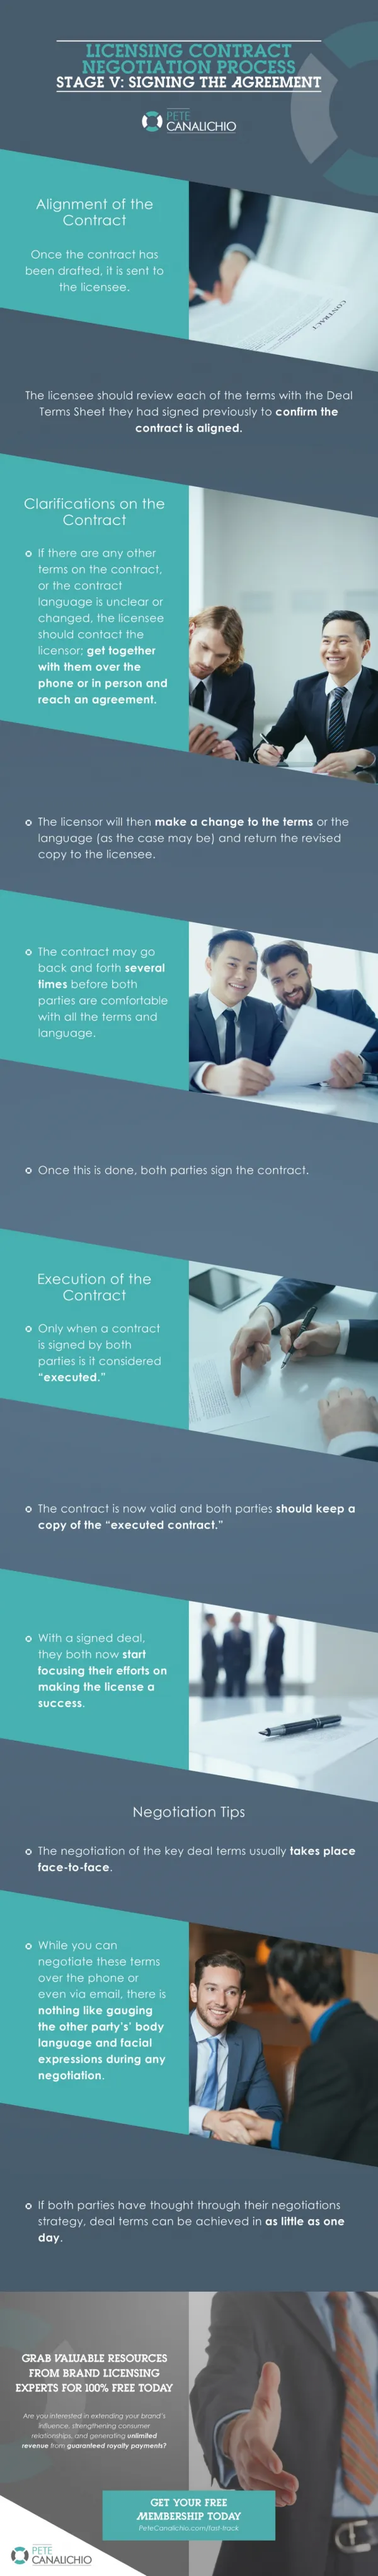 Licensing Contract Negotiation Process - Stage 5: Signing the Agreement